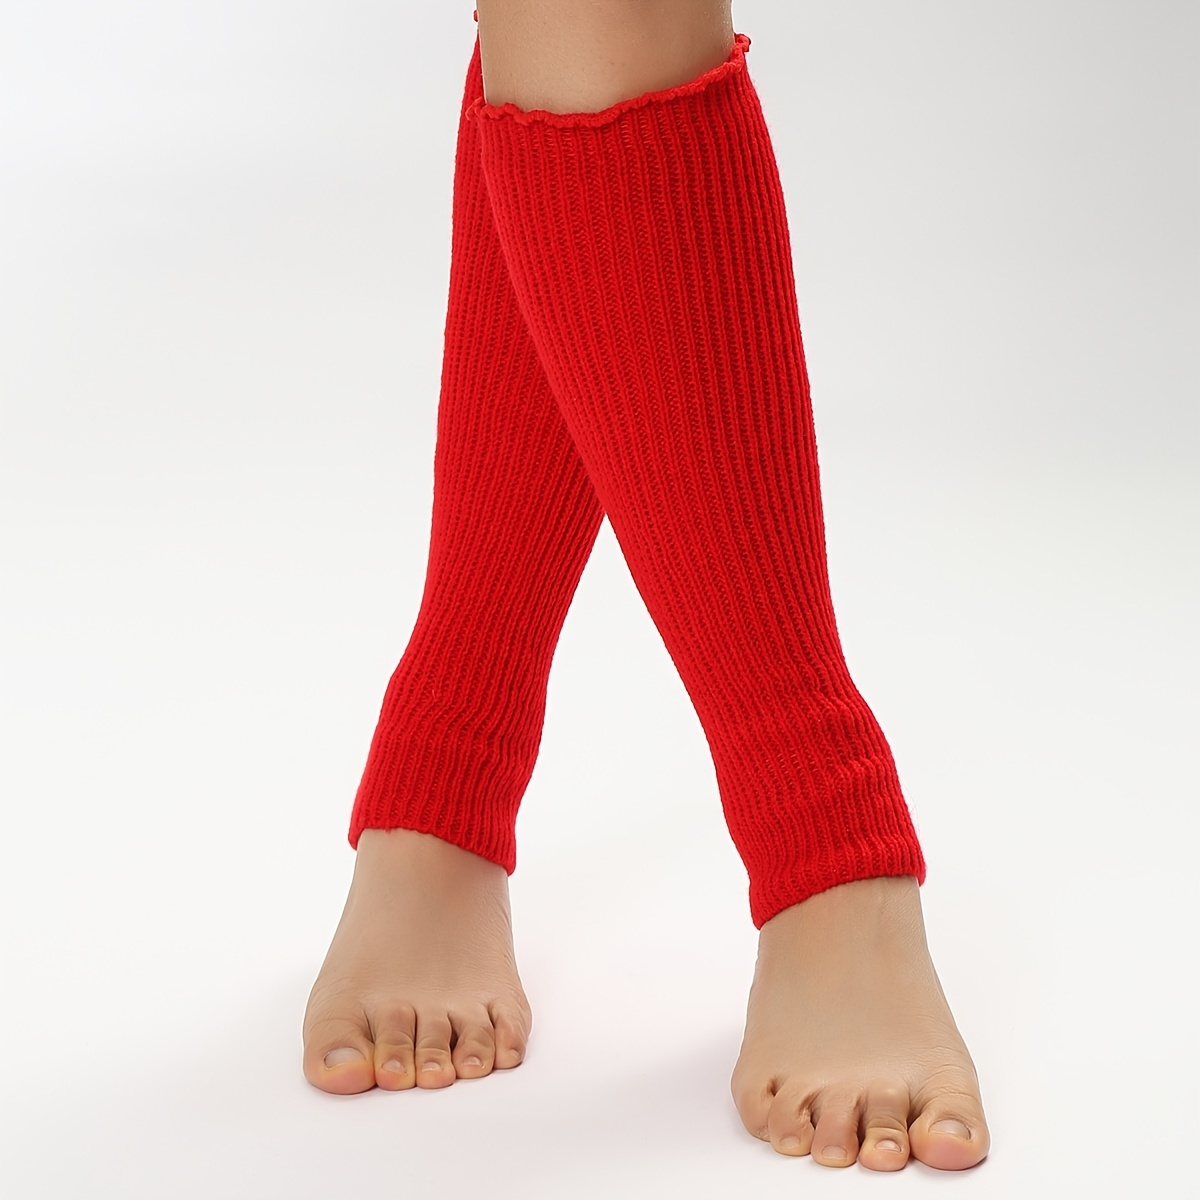  Red Leg Warmers For Women 80s Red Leg Warmers 80s  Accessories For Women Cable Knit Leg Warmers Womens Leg Warmers Red